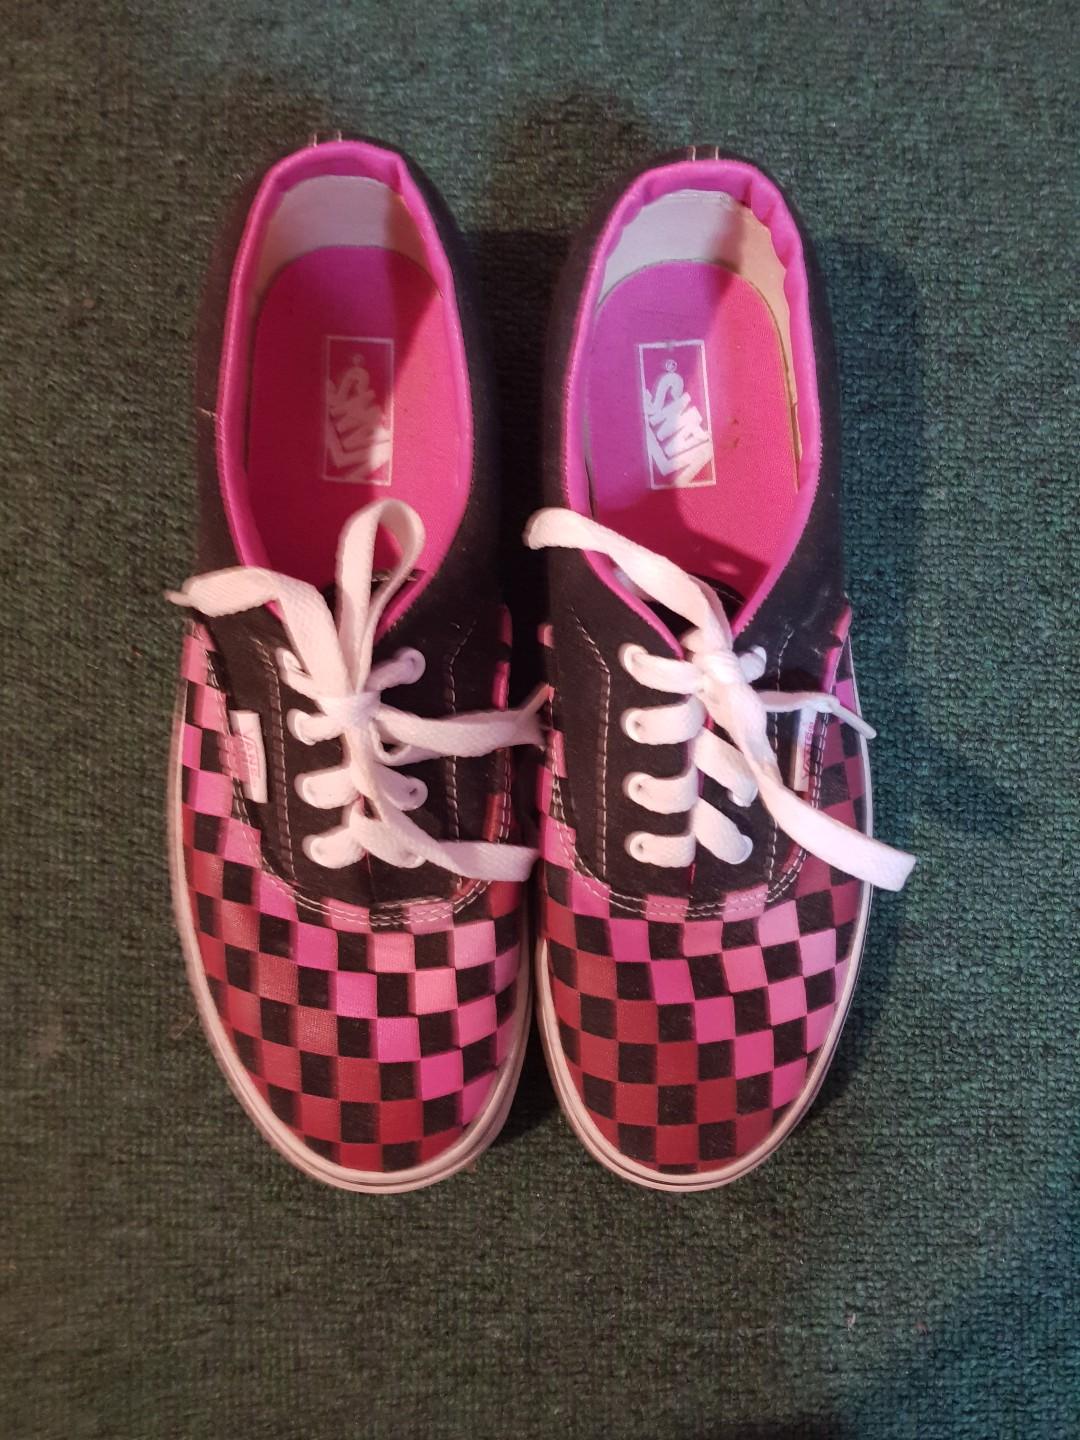 vans checkered pink and black